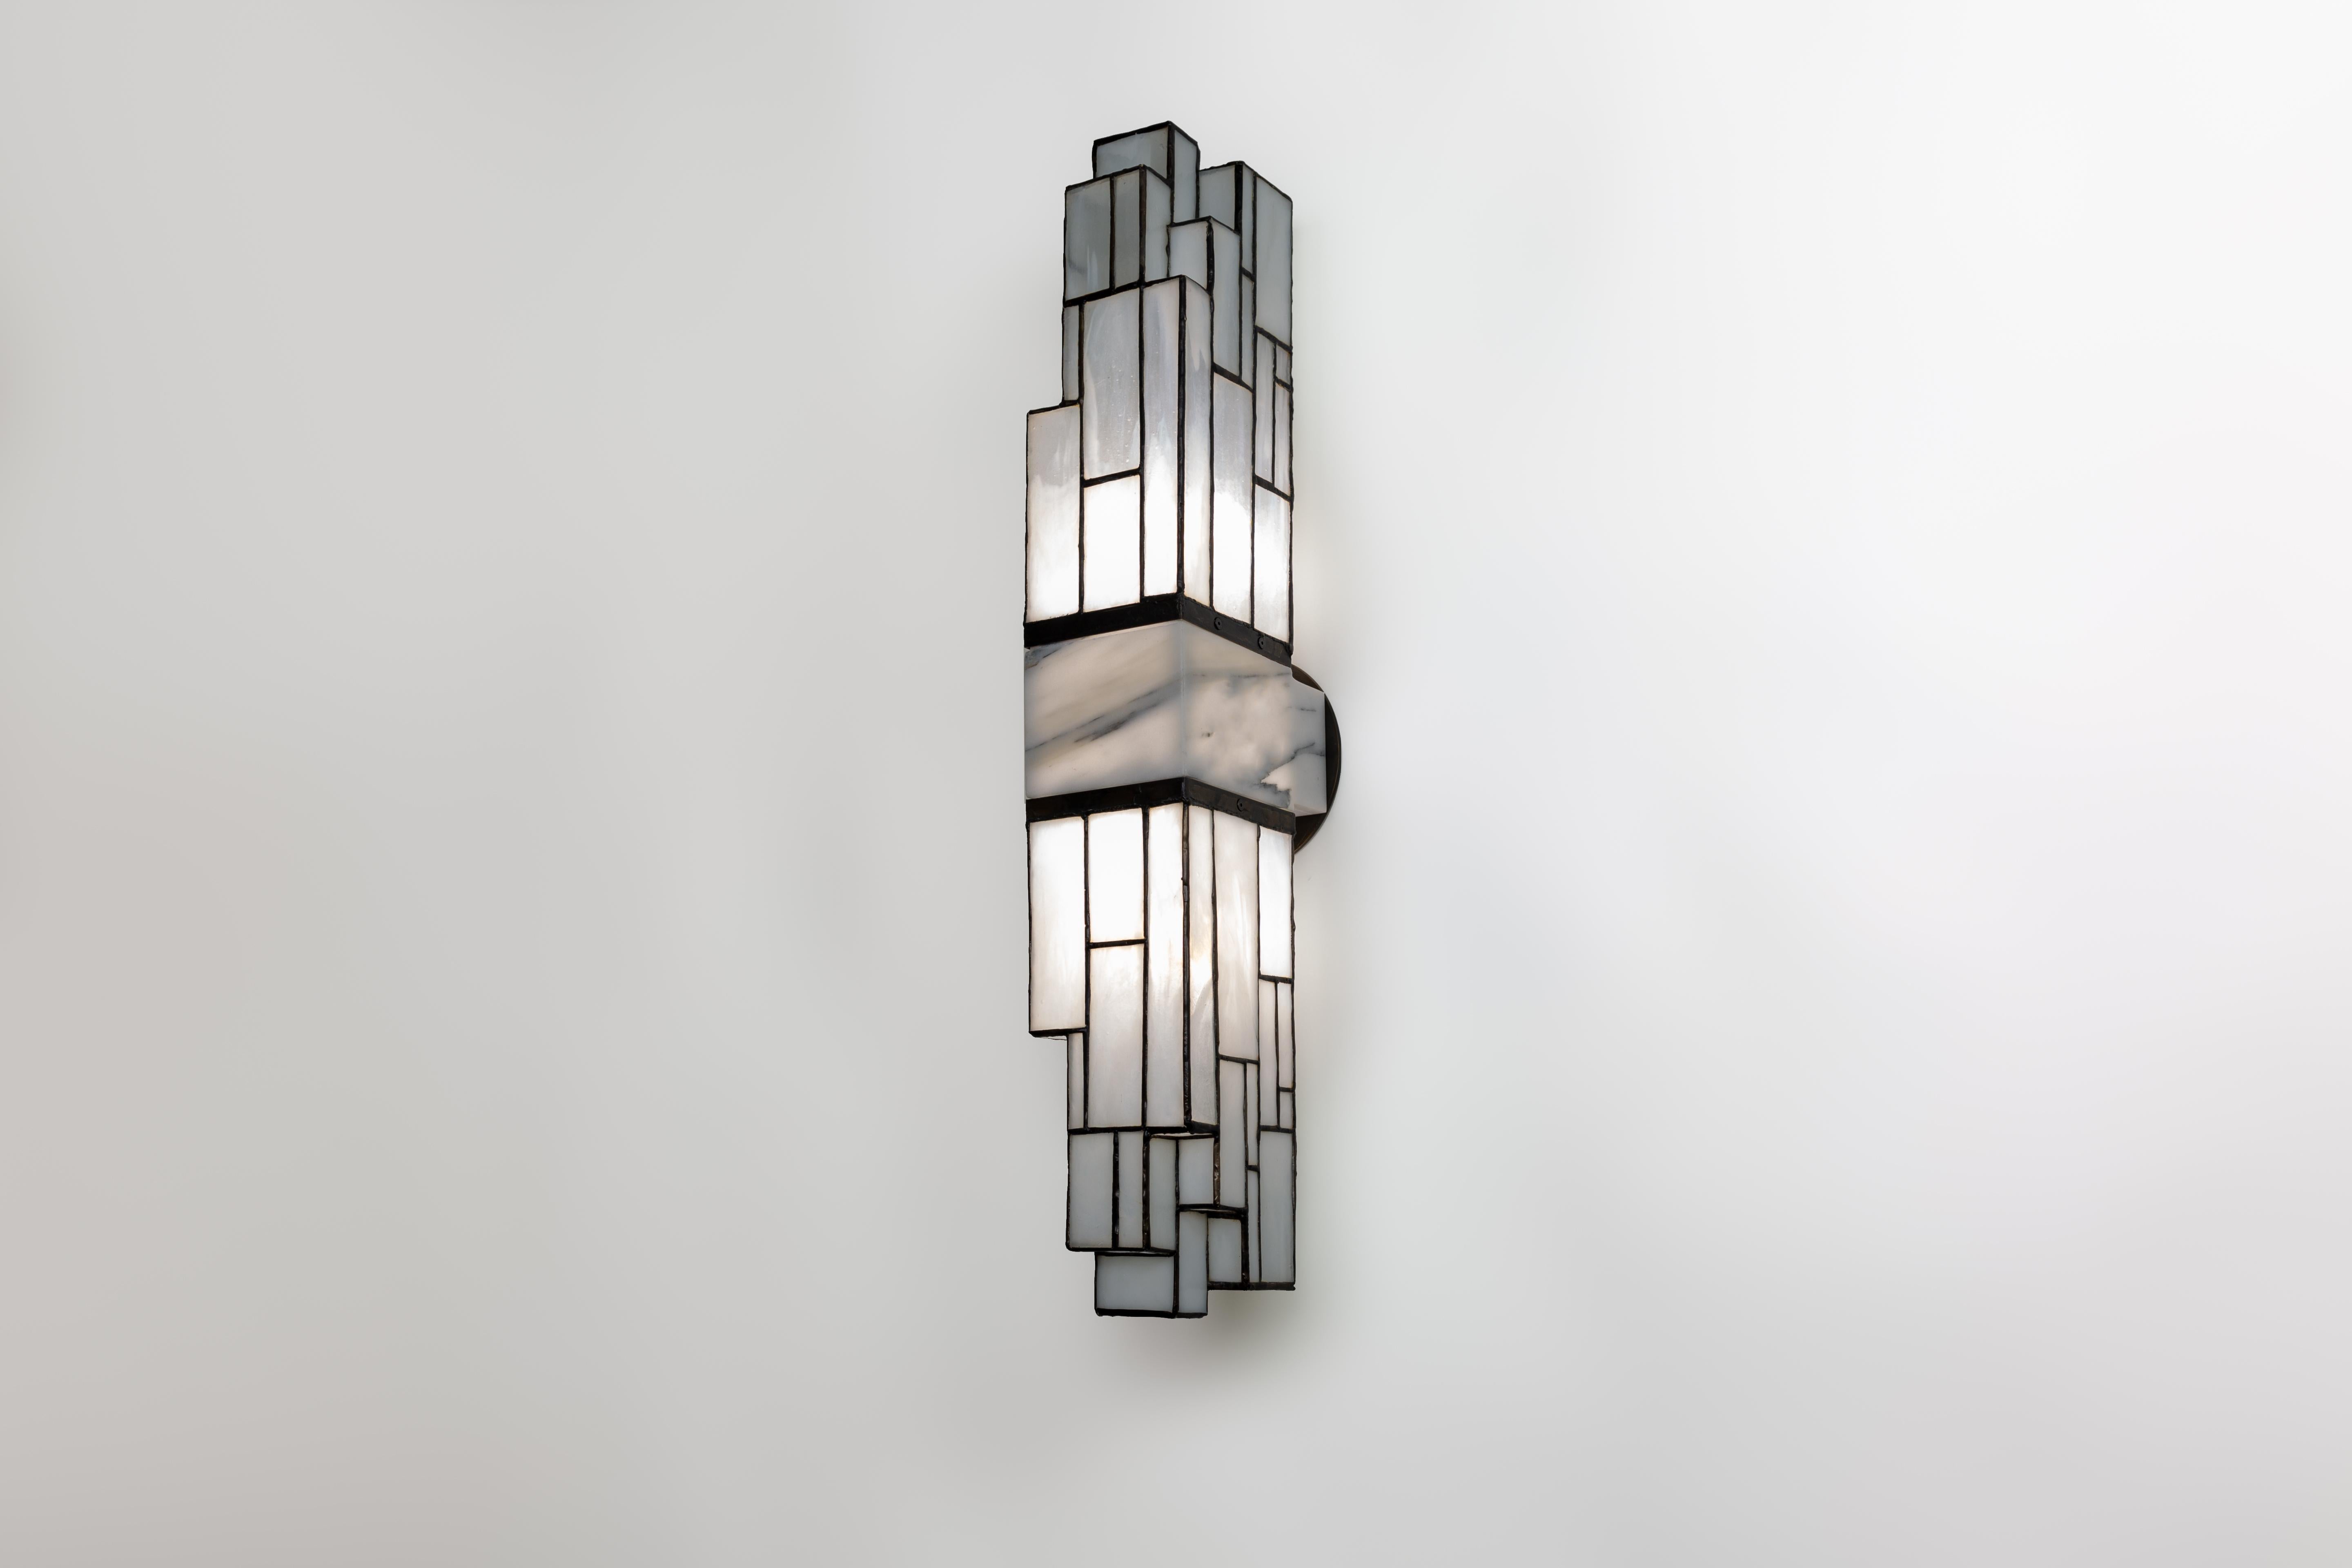 Galena, Brass, Marble, Glass Contemporary Wall Sconce, Kalin Asenov In New Condition For Sale In Savannah, GA